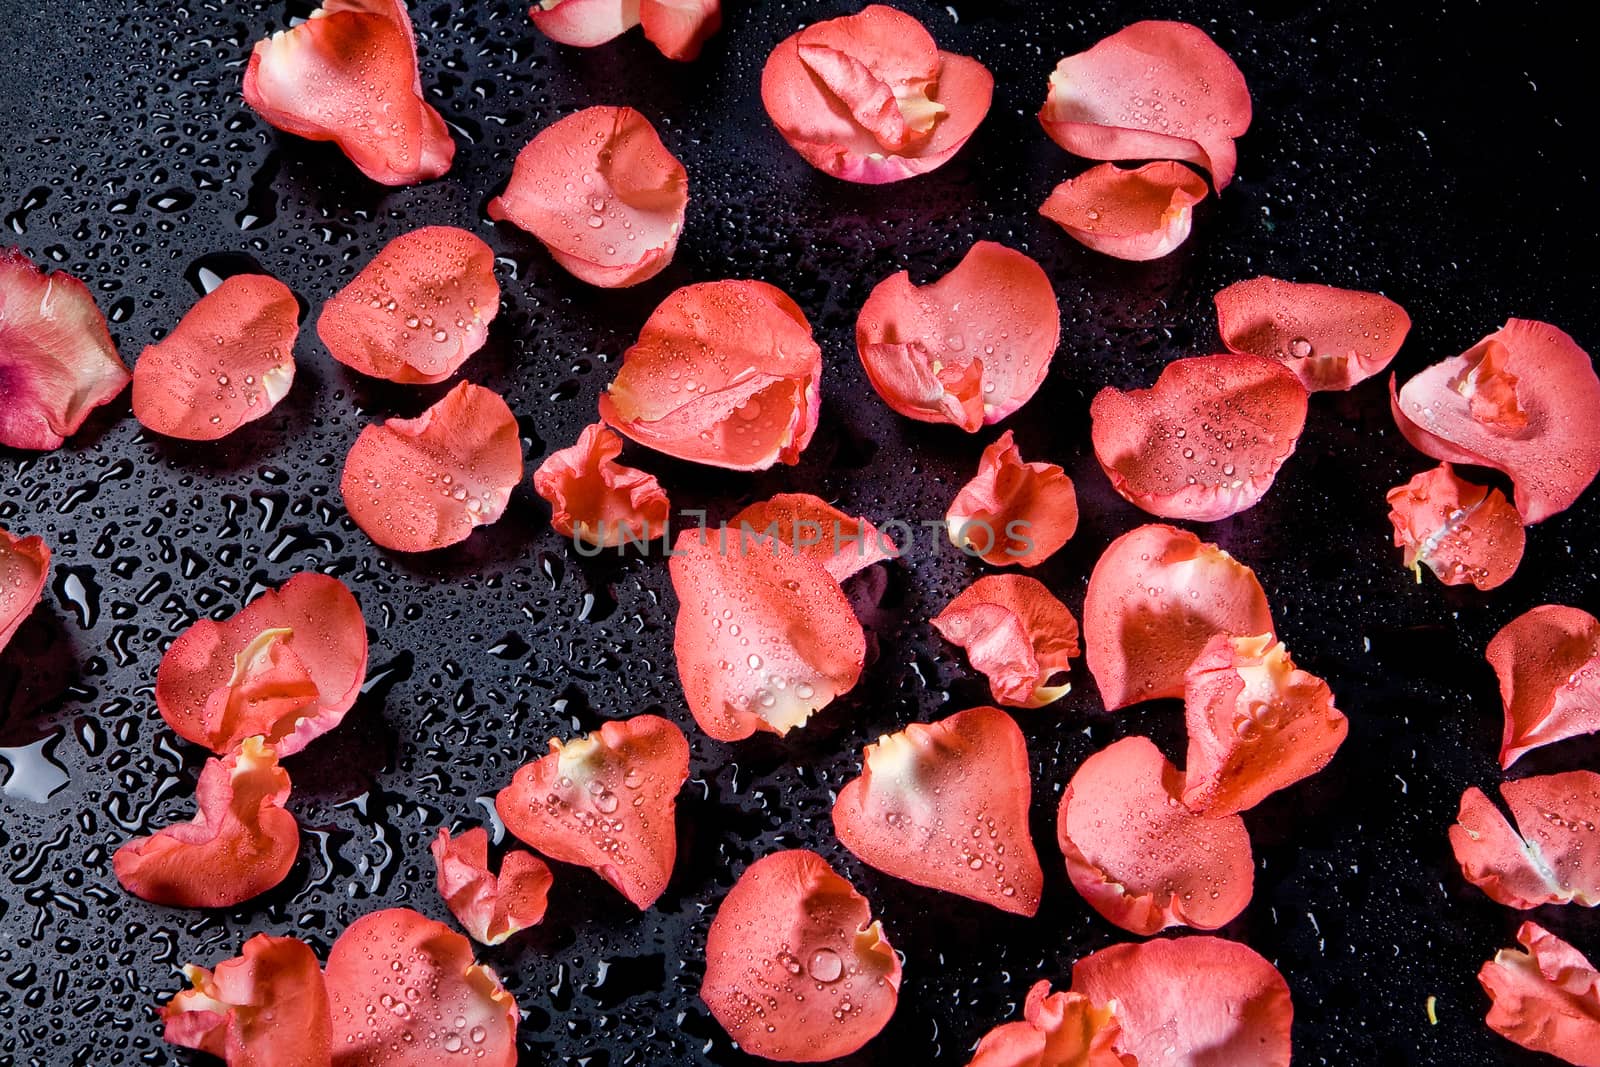 Red rose petals on the studio abckground